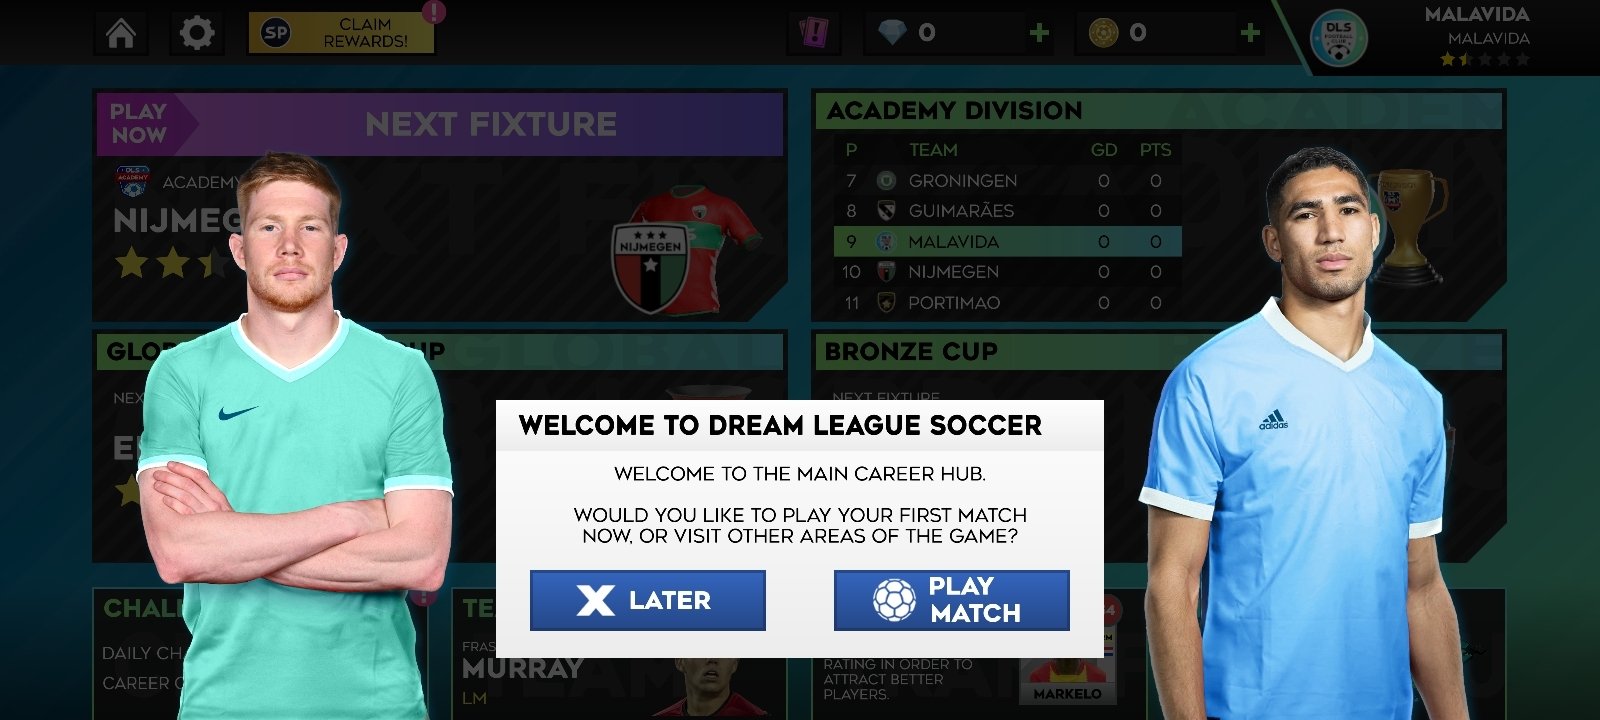 download the new version for apple Soccer Football League 19